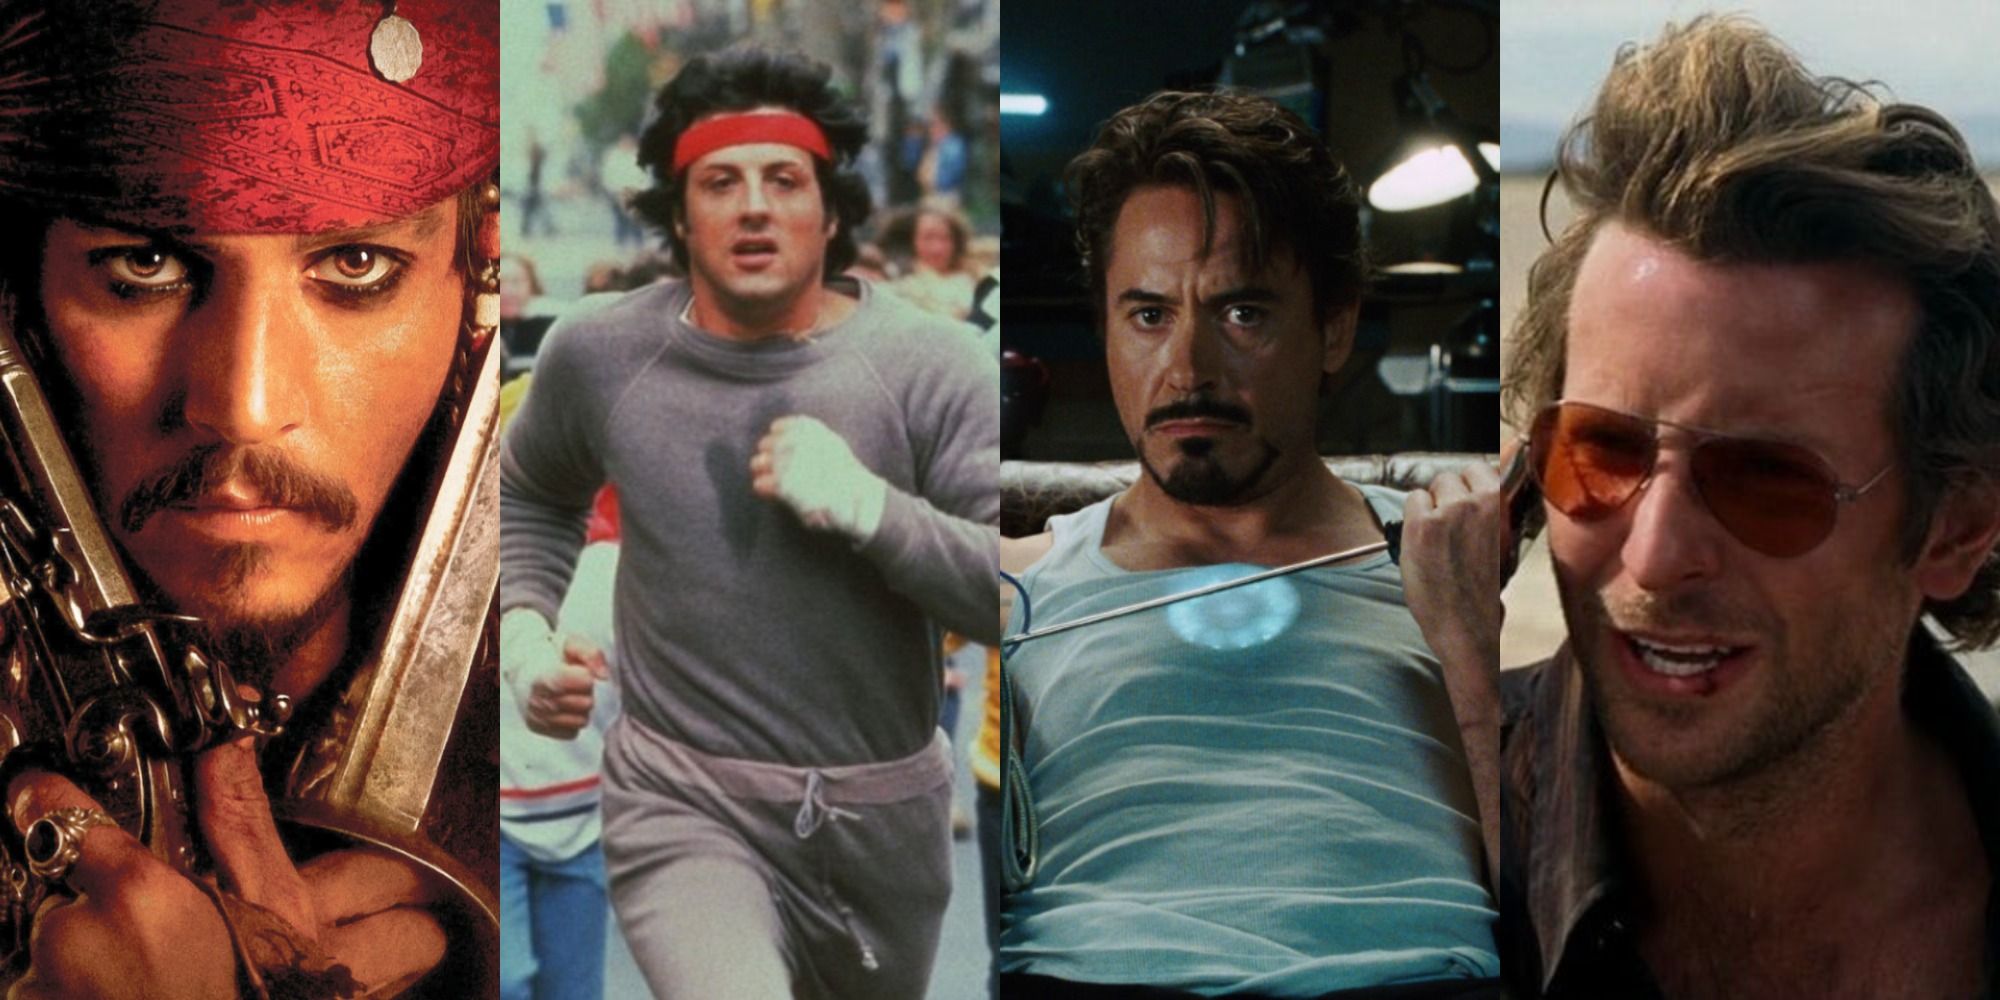 Split image of Pirates of the Caribbean, Rocky, Iron Man, and The Hangover